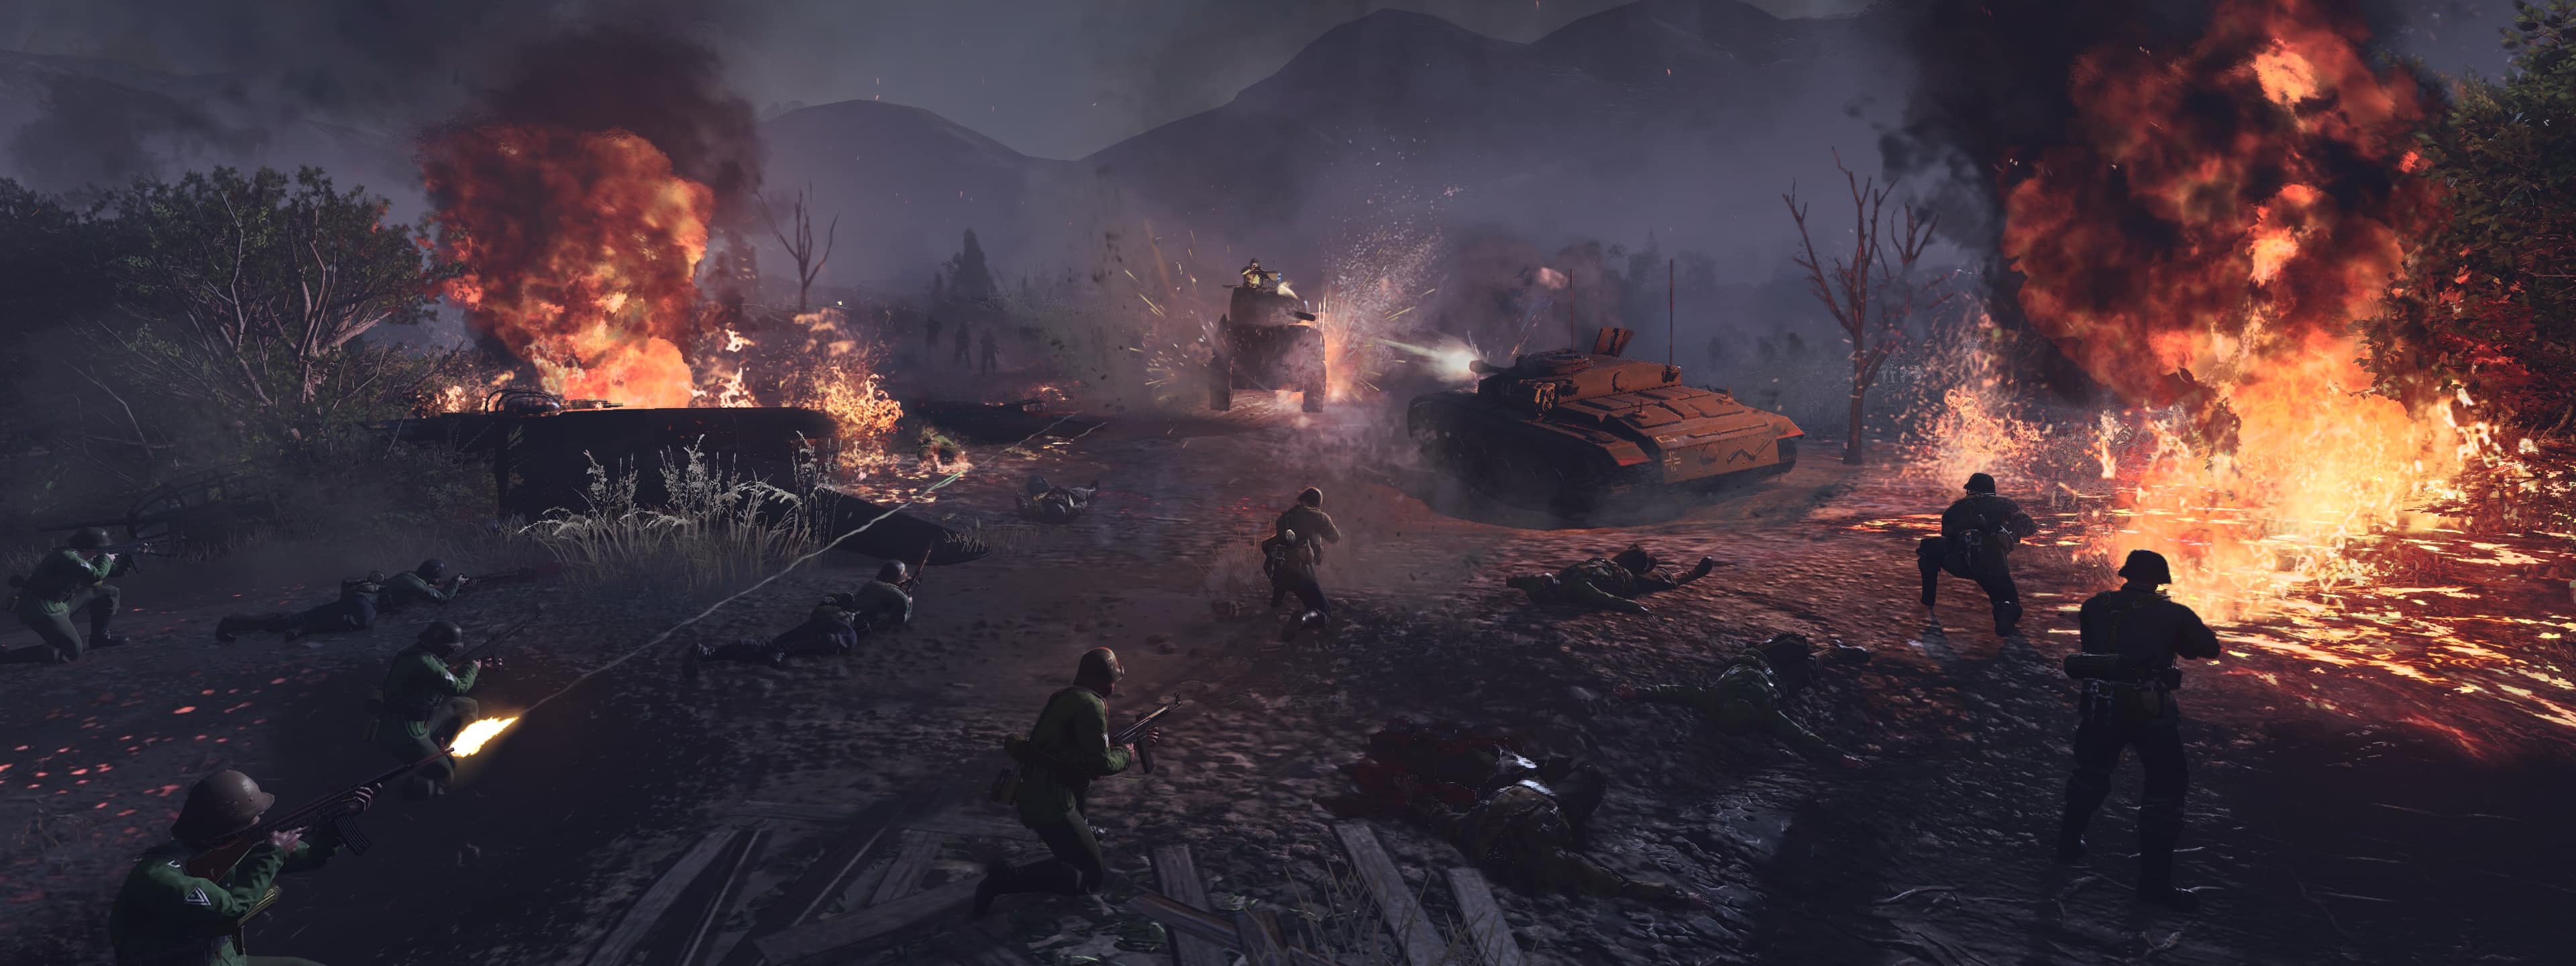 Company of Heroes 3 Hands On - Impresiones GamersRD 156 (2)